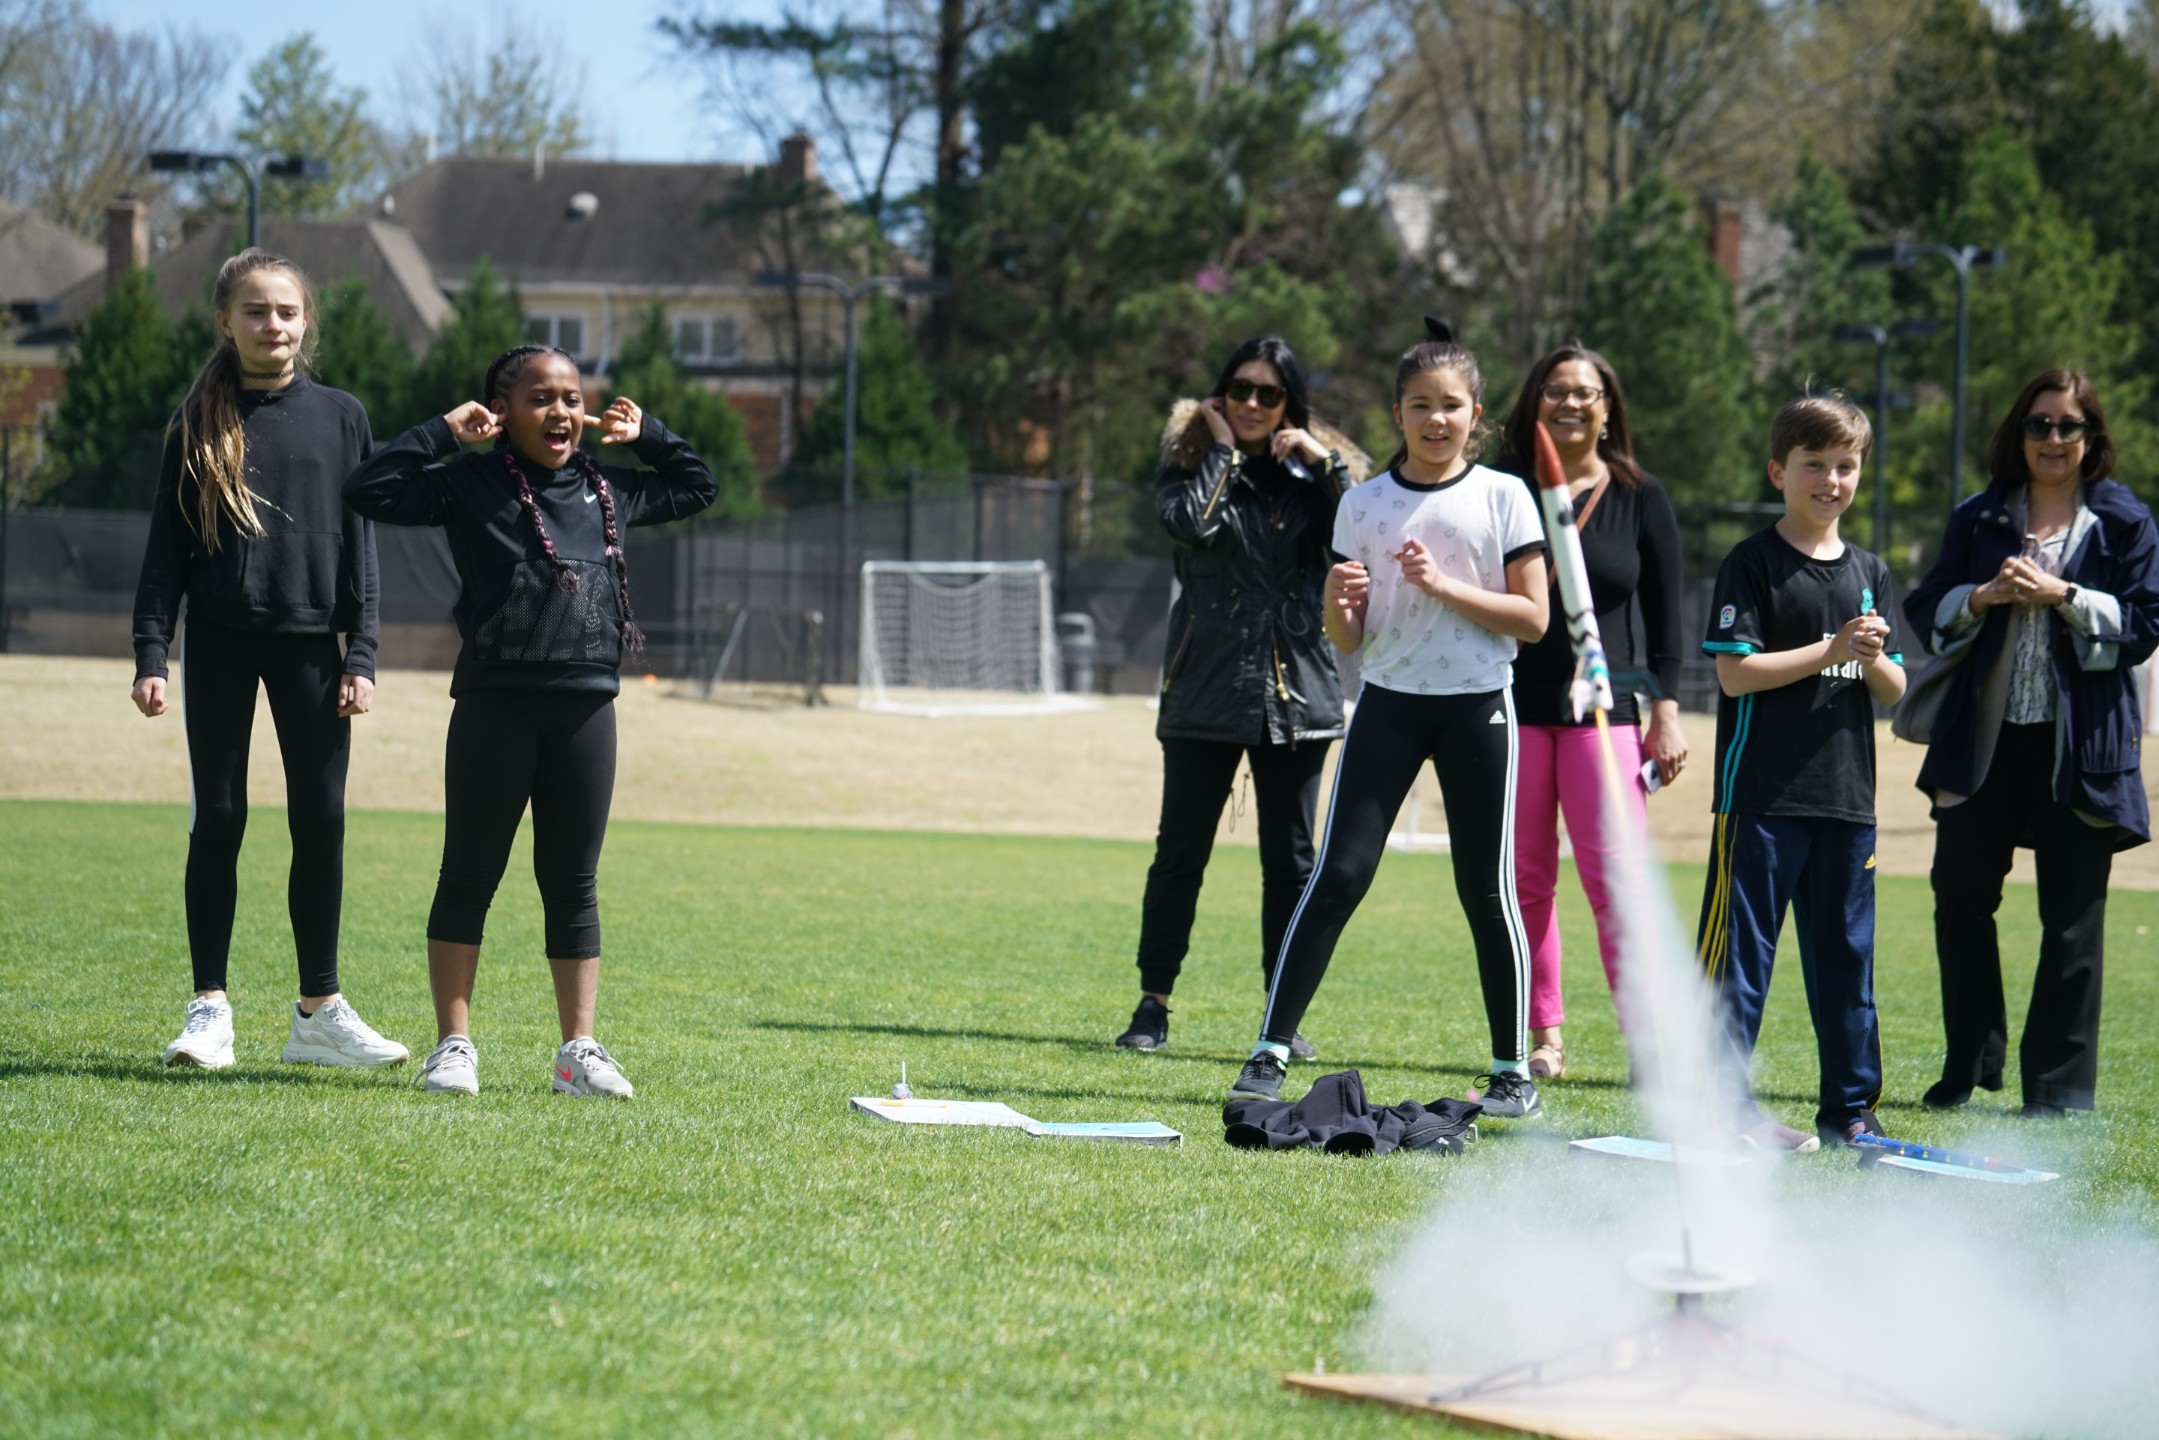 Group of students watching a rocket take-off